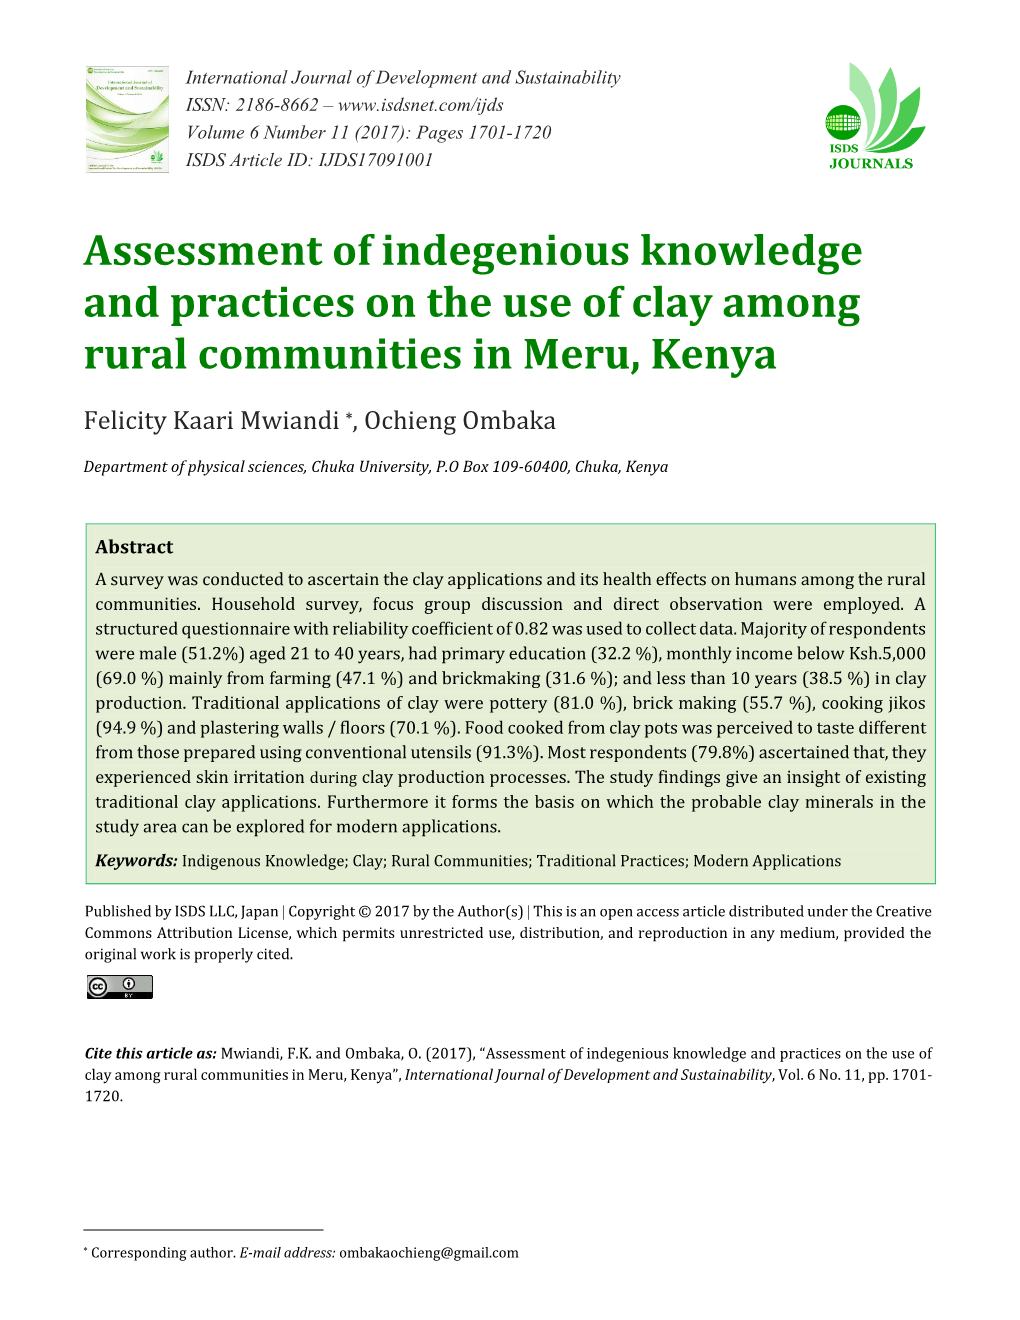 Assessment of Indegenious Knowledge and Practices on the Use of Clay Among Rural Communities in Meru, Kenya